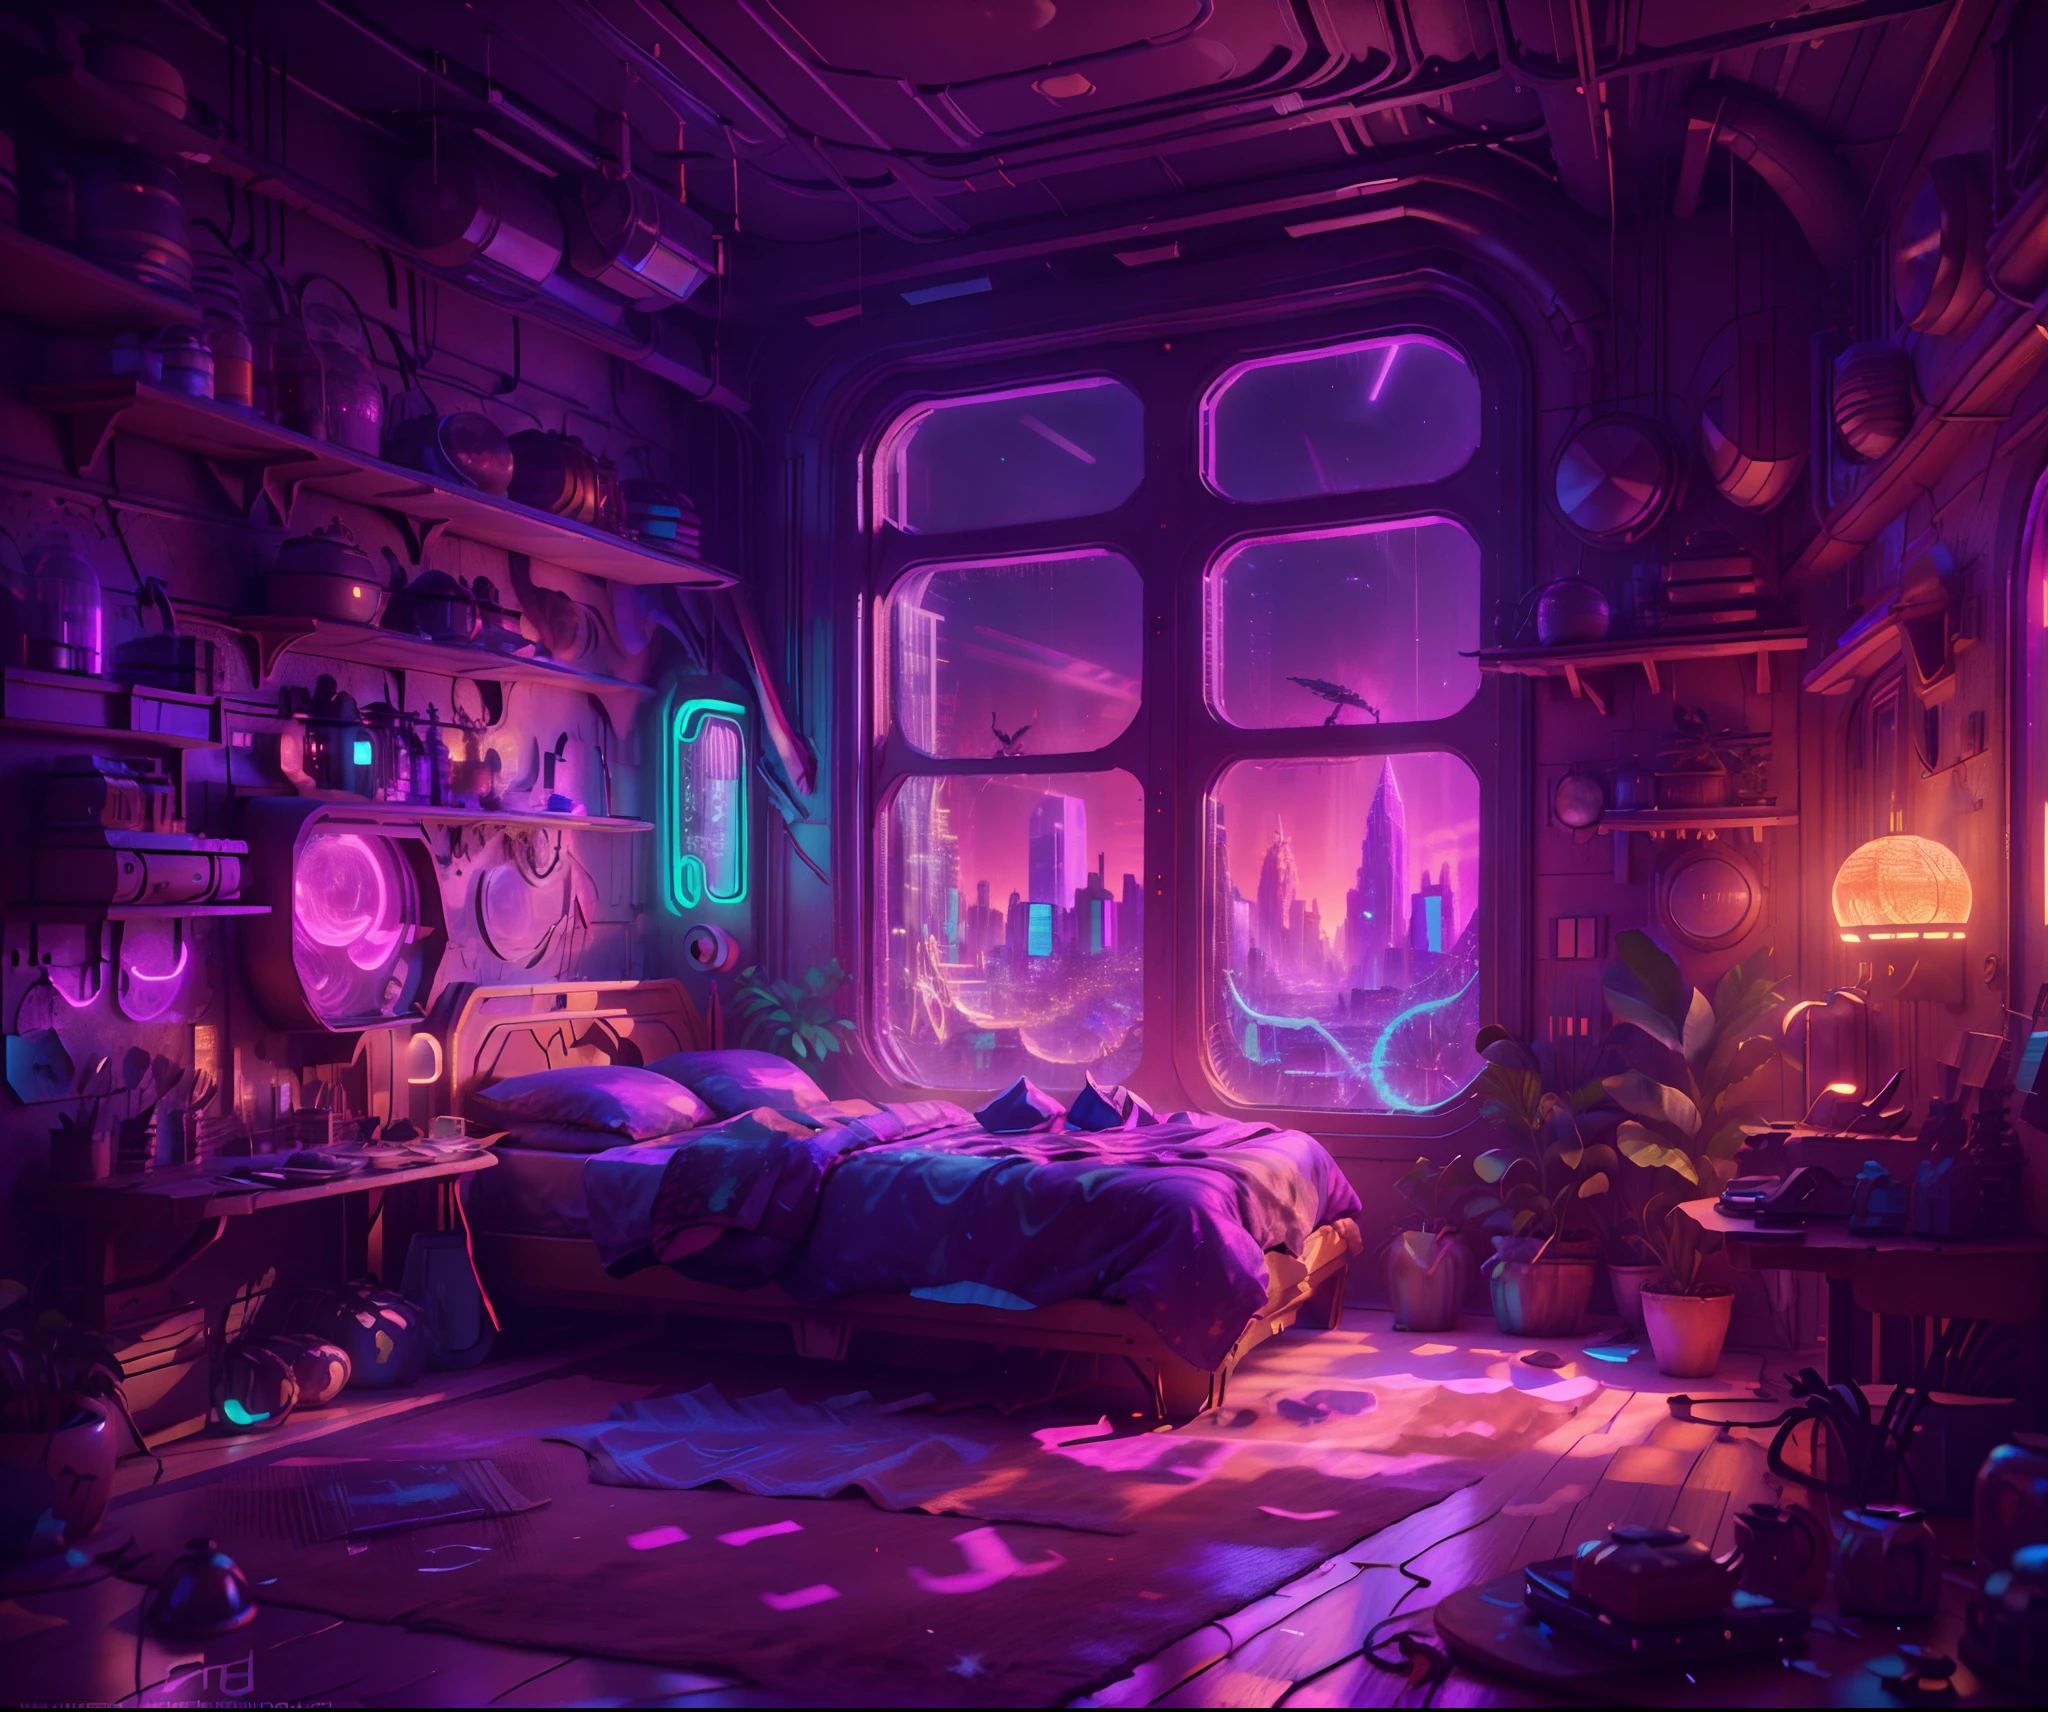 ((masterpiece)), (ultra-detailed), (intricate details), (high resolution CGI artwork 8k), Create an image of a small realistic antique (bedroom) at nighttime with warm and pastel coloring and light. One of the walls should feature a big window with a busy, colorful, and detailed (cyberpunk), synthwave, neon cityscape. The city should have a futuristic style with lots of colors, neon lights, signs, and differently-sized buildings. The cityscape should be extremely detailed with depth of field. The city should have a lot of visual interest with many small details. Utilize atmospheric and ambient lighting to create depth and evoke the feel of a busy futuristic city outside the window. Pay close attention to details like intricate, hires eyes and 90s bedroom accents. Camera: wide shot showing the bed or desk and the window. The window should be the focal point of the image. Lighting: use atmospheric and volumetric lighting to enhance the cityscape details. The room should be illuminated by the neon lights from the cityscape.